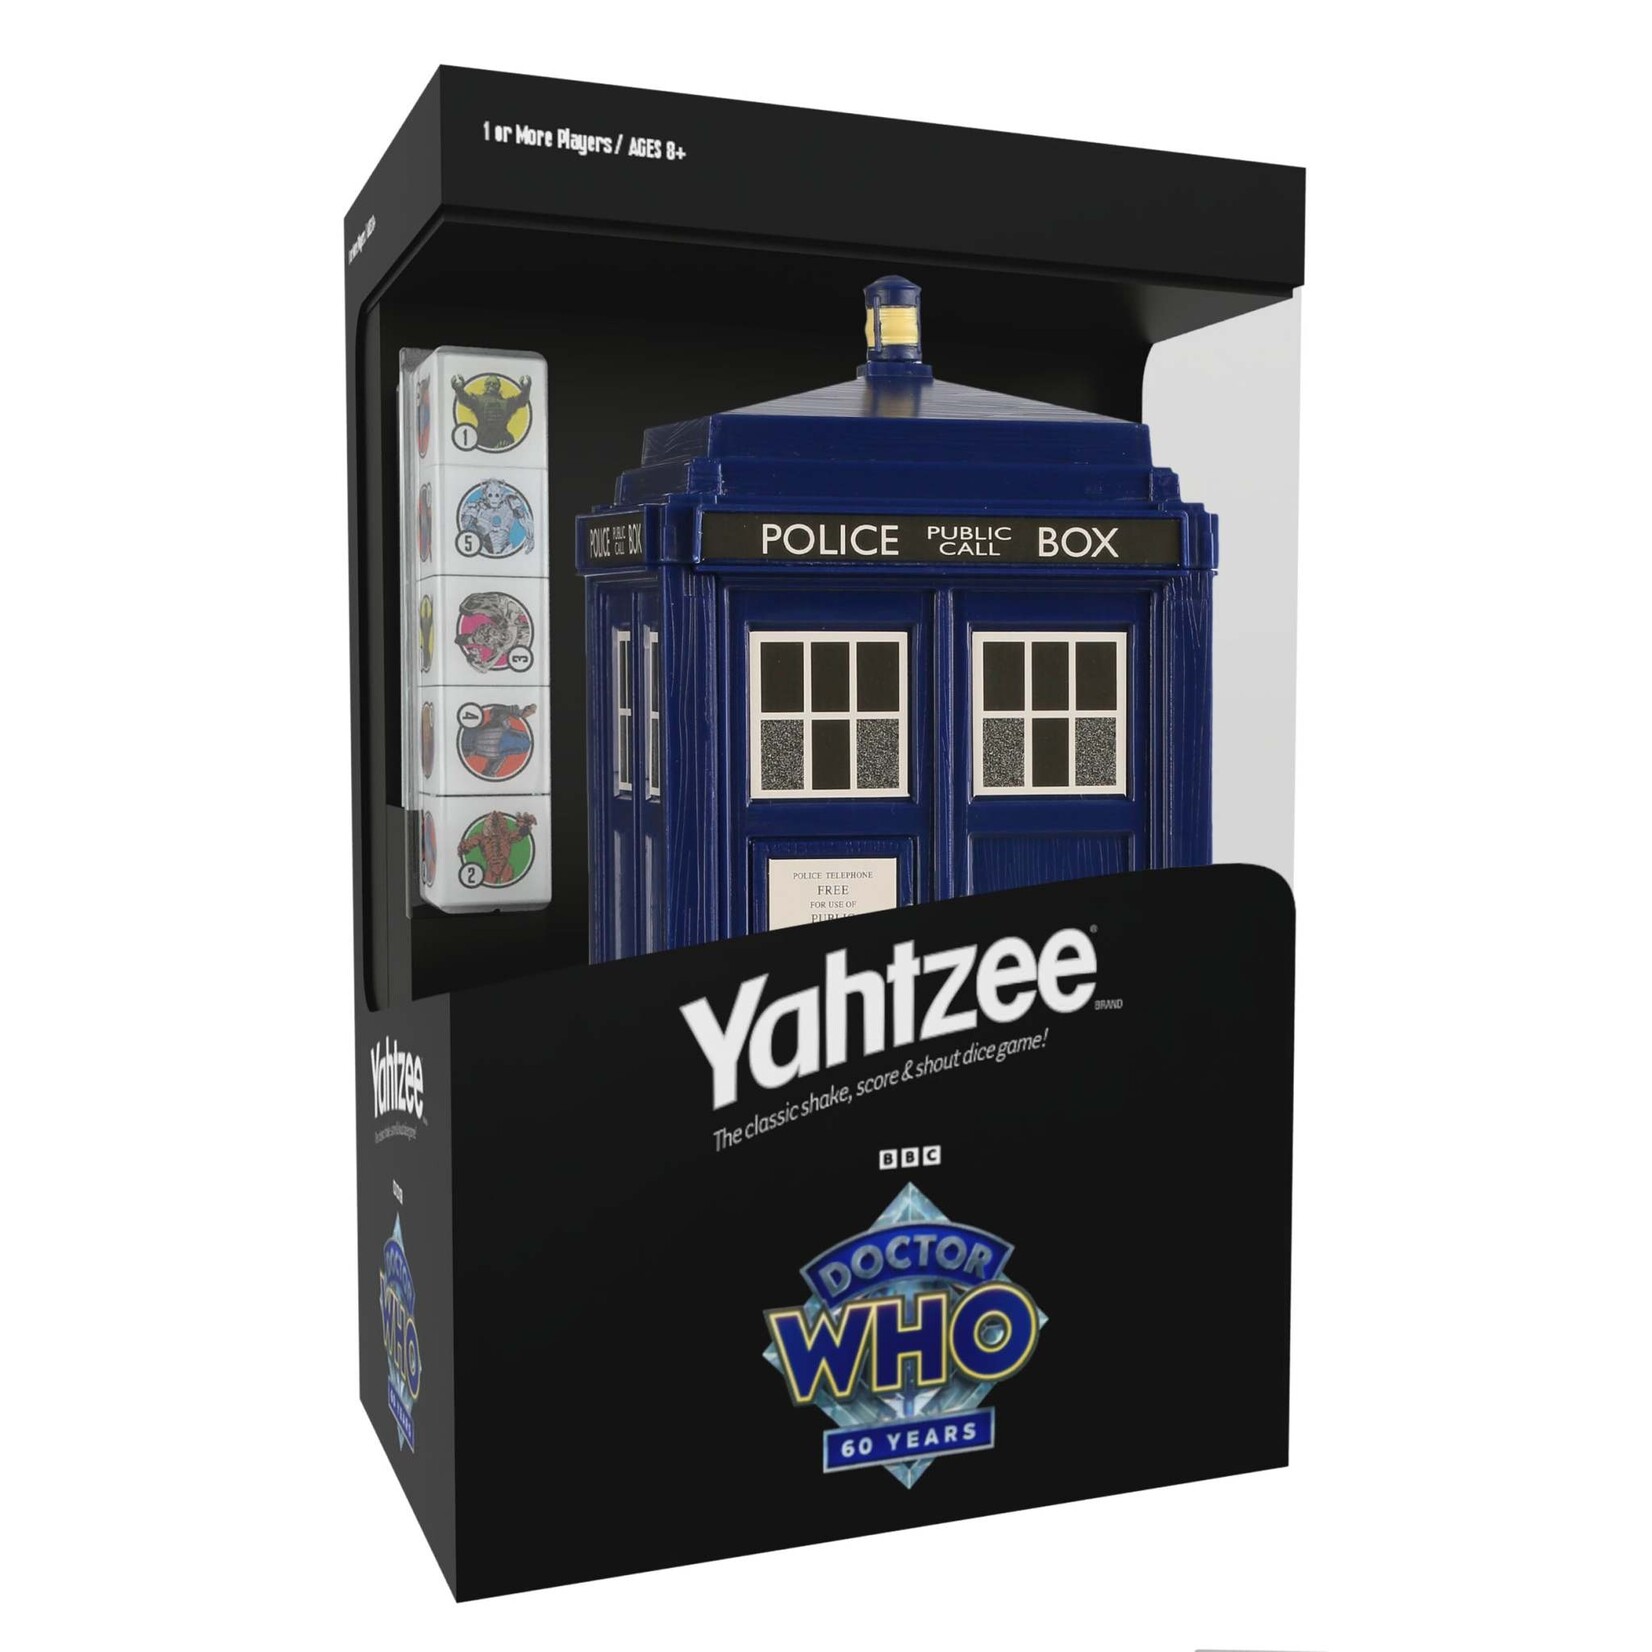 The Op Yahtzee: Doctor Who 60th Anniversary Edition